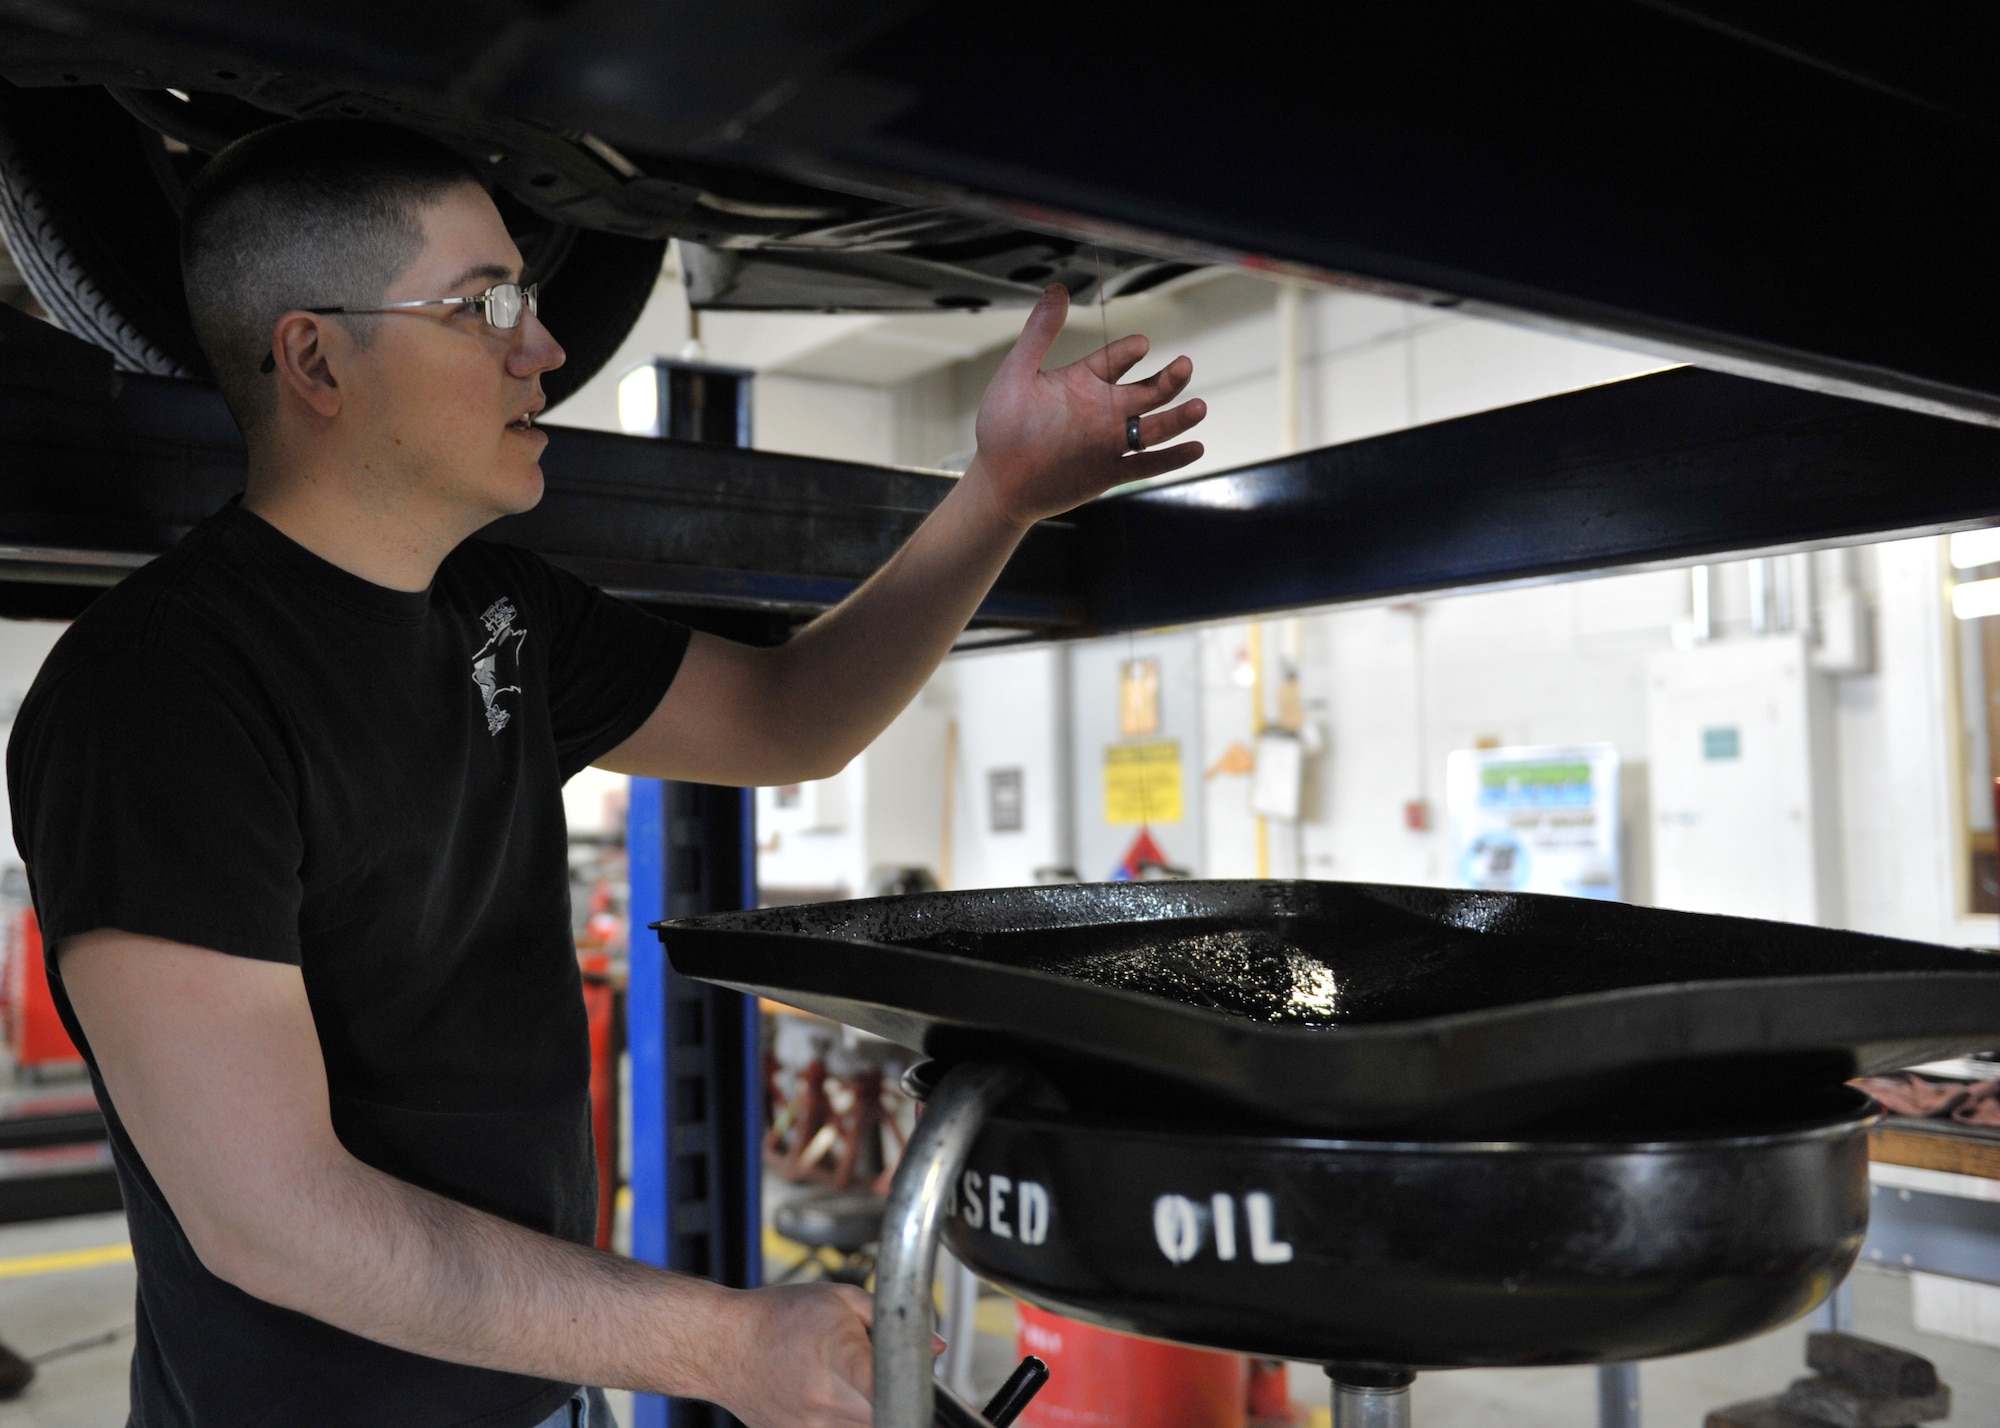 Senior Airman David Sanchez, 509th Maintenance Squadron aerospace ground technician, performs a routine oil change on his vehicle at Spirit Auto, Whiteman Air Force Base, Mo., March 12, 2013. Customers can use a vehicle bay to conduct self-help projects on their vehicles, or make an appointment to have their car serviced. (U.S. Air Force photo by Heidi Hunt/Released)